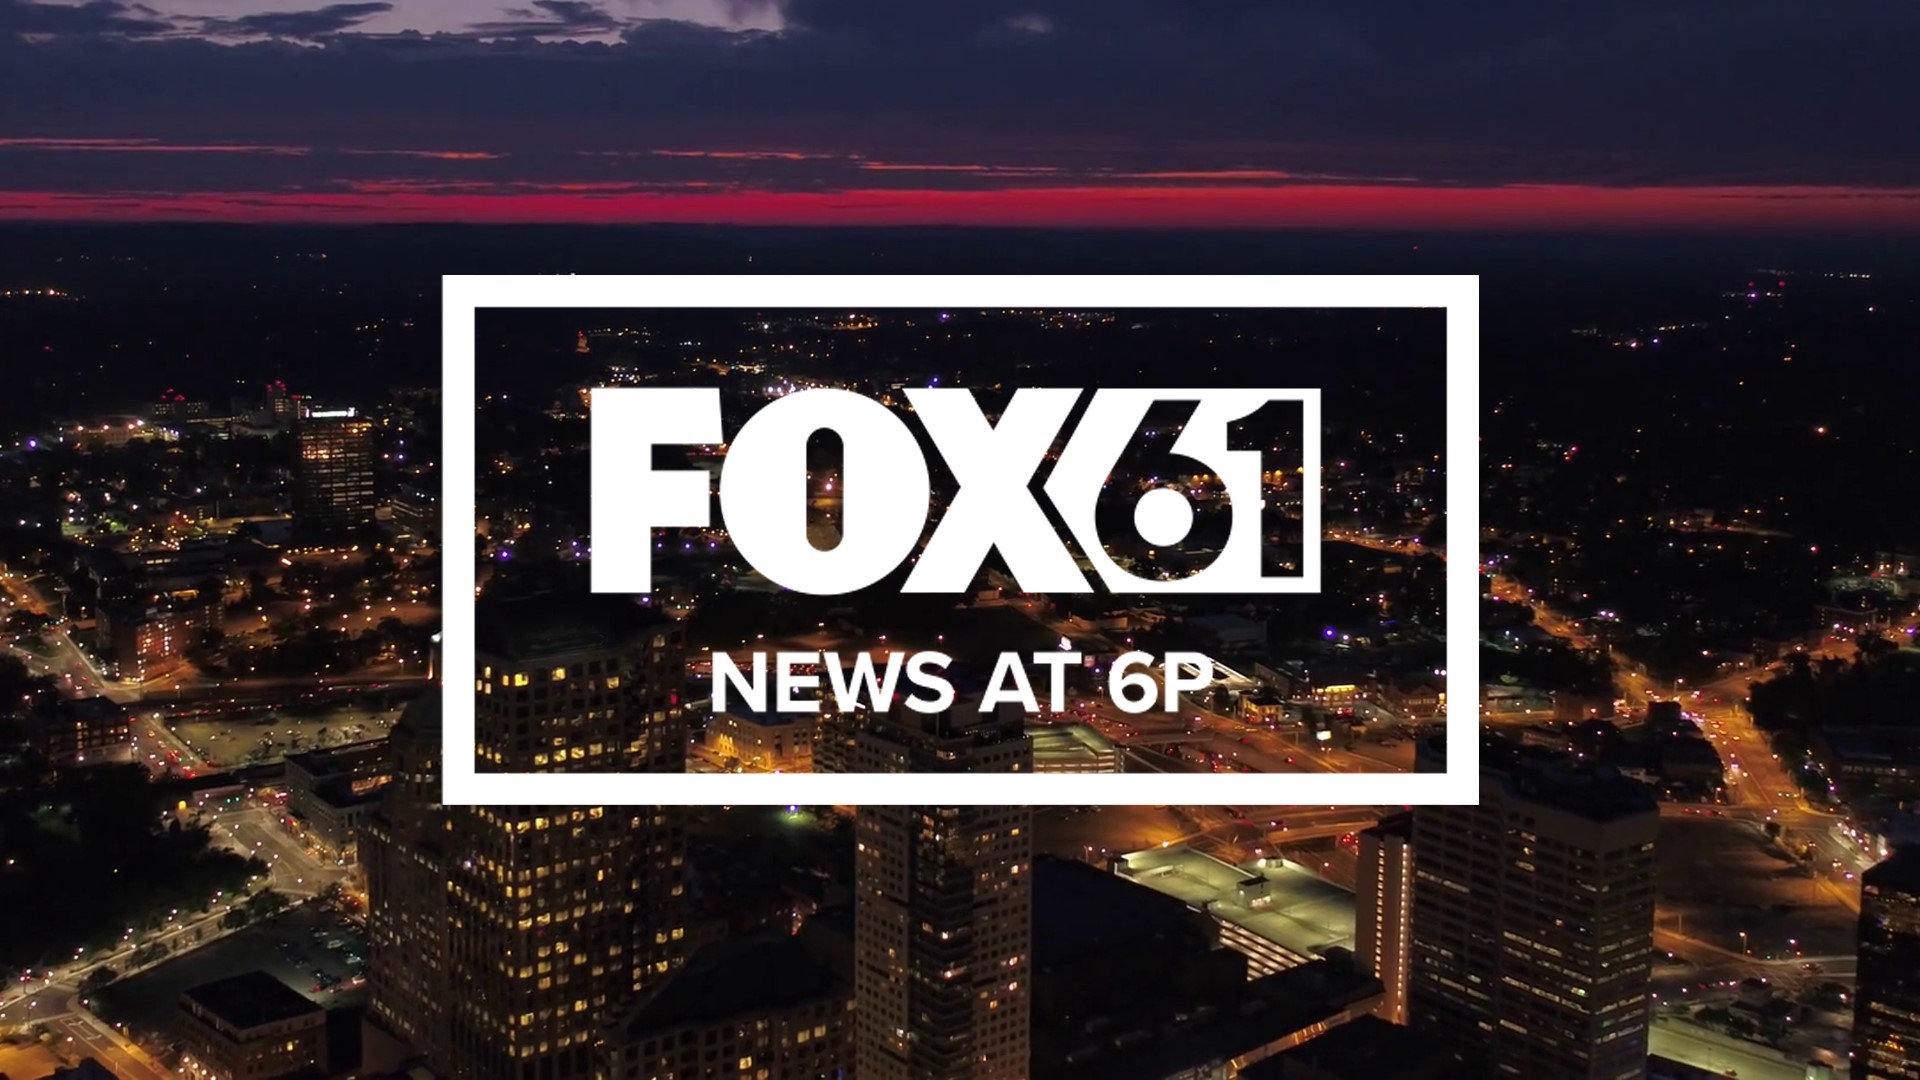 Here are the top stories for FOX61 News at 6 p.m. on Nov. 23, 2022